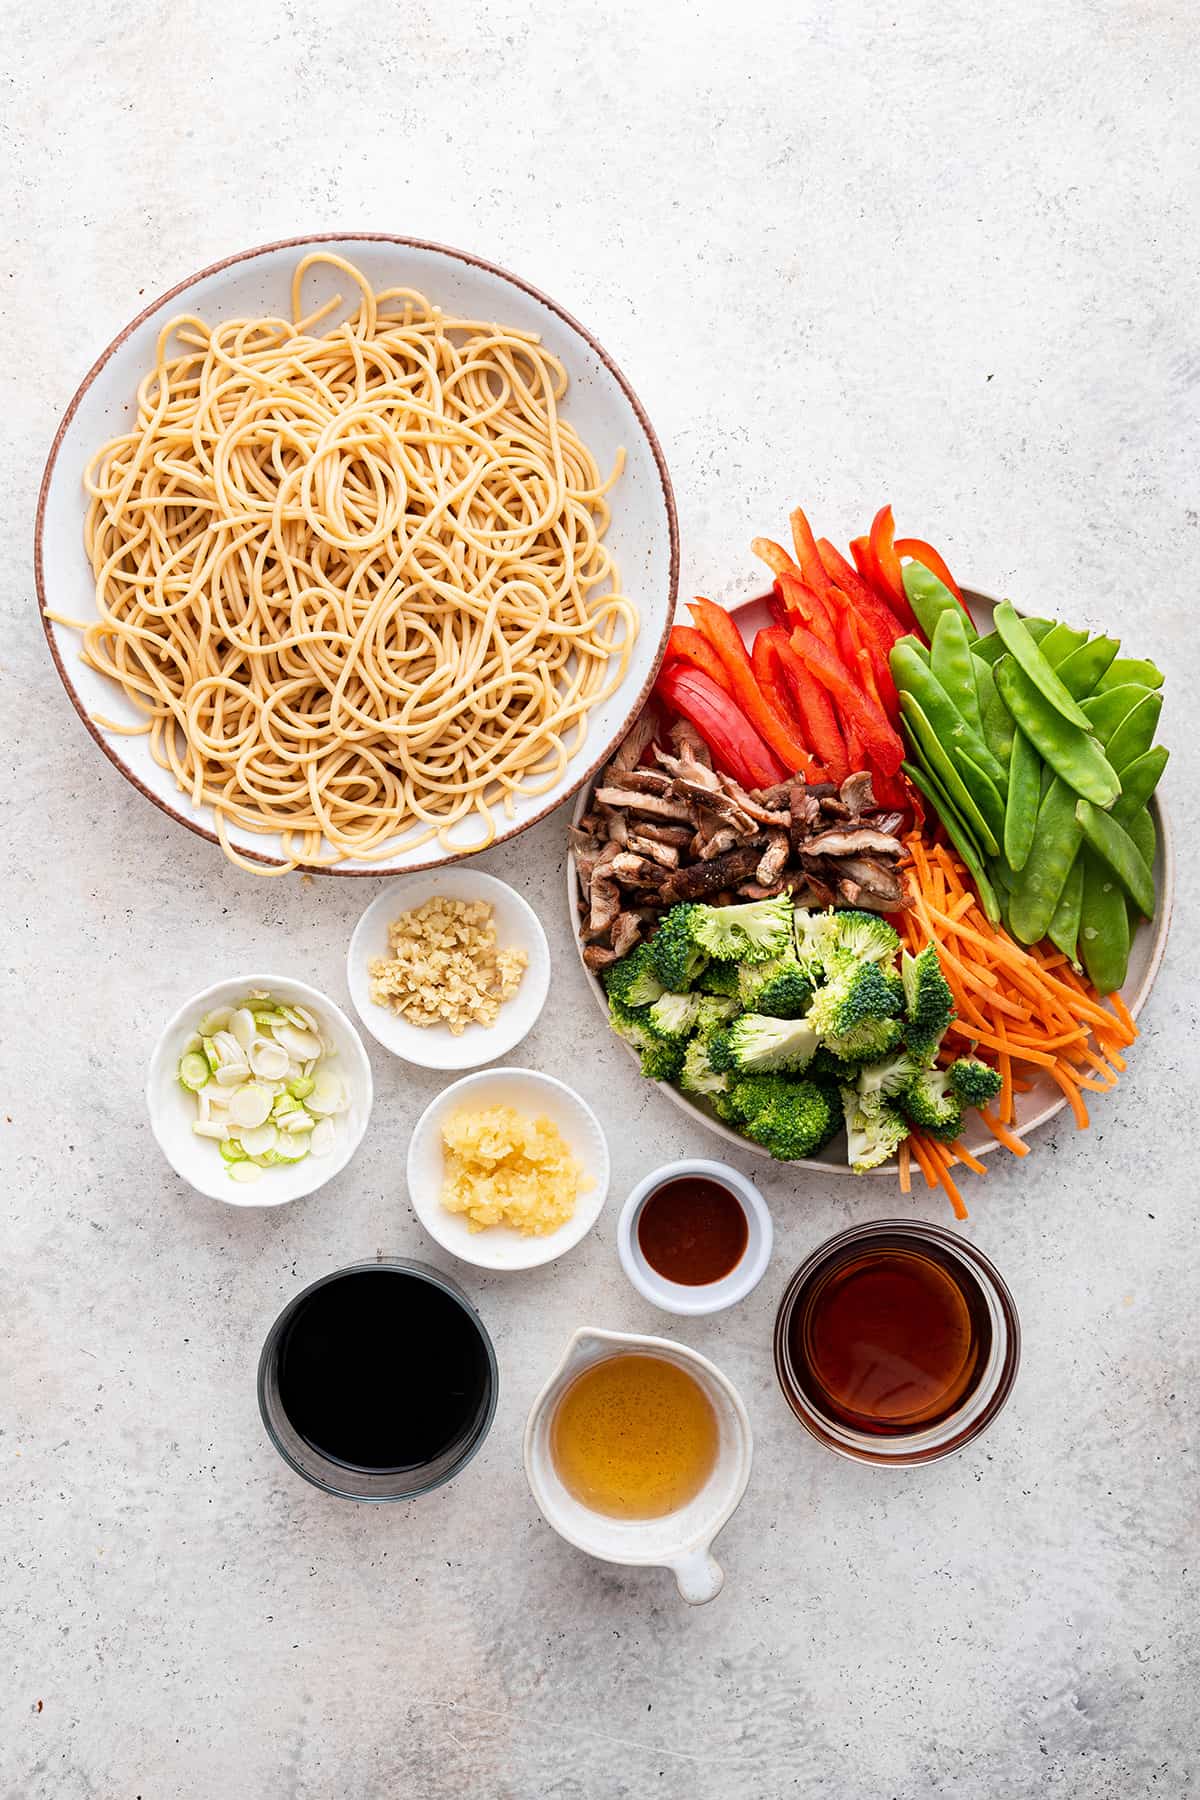 Overhead view of ingredients for vegetable lo mein